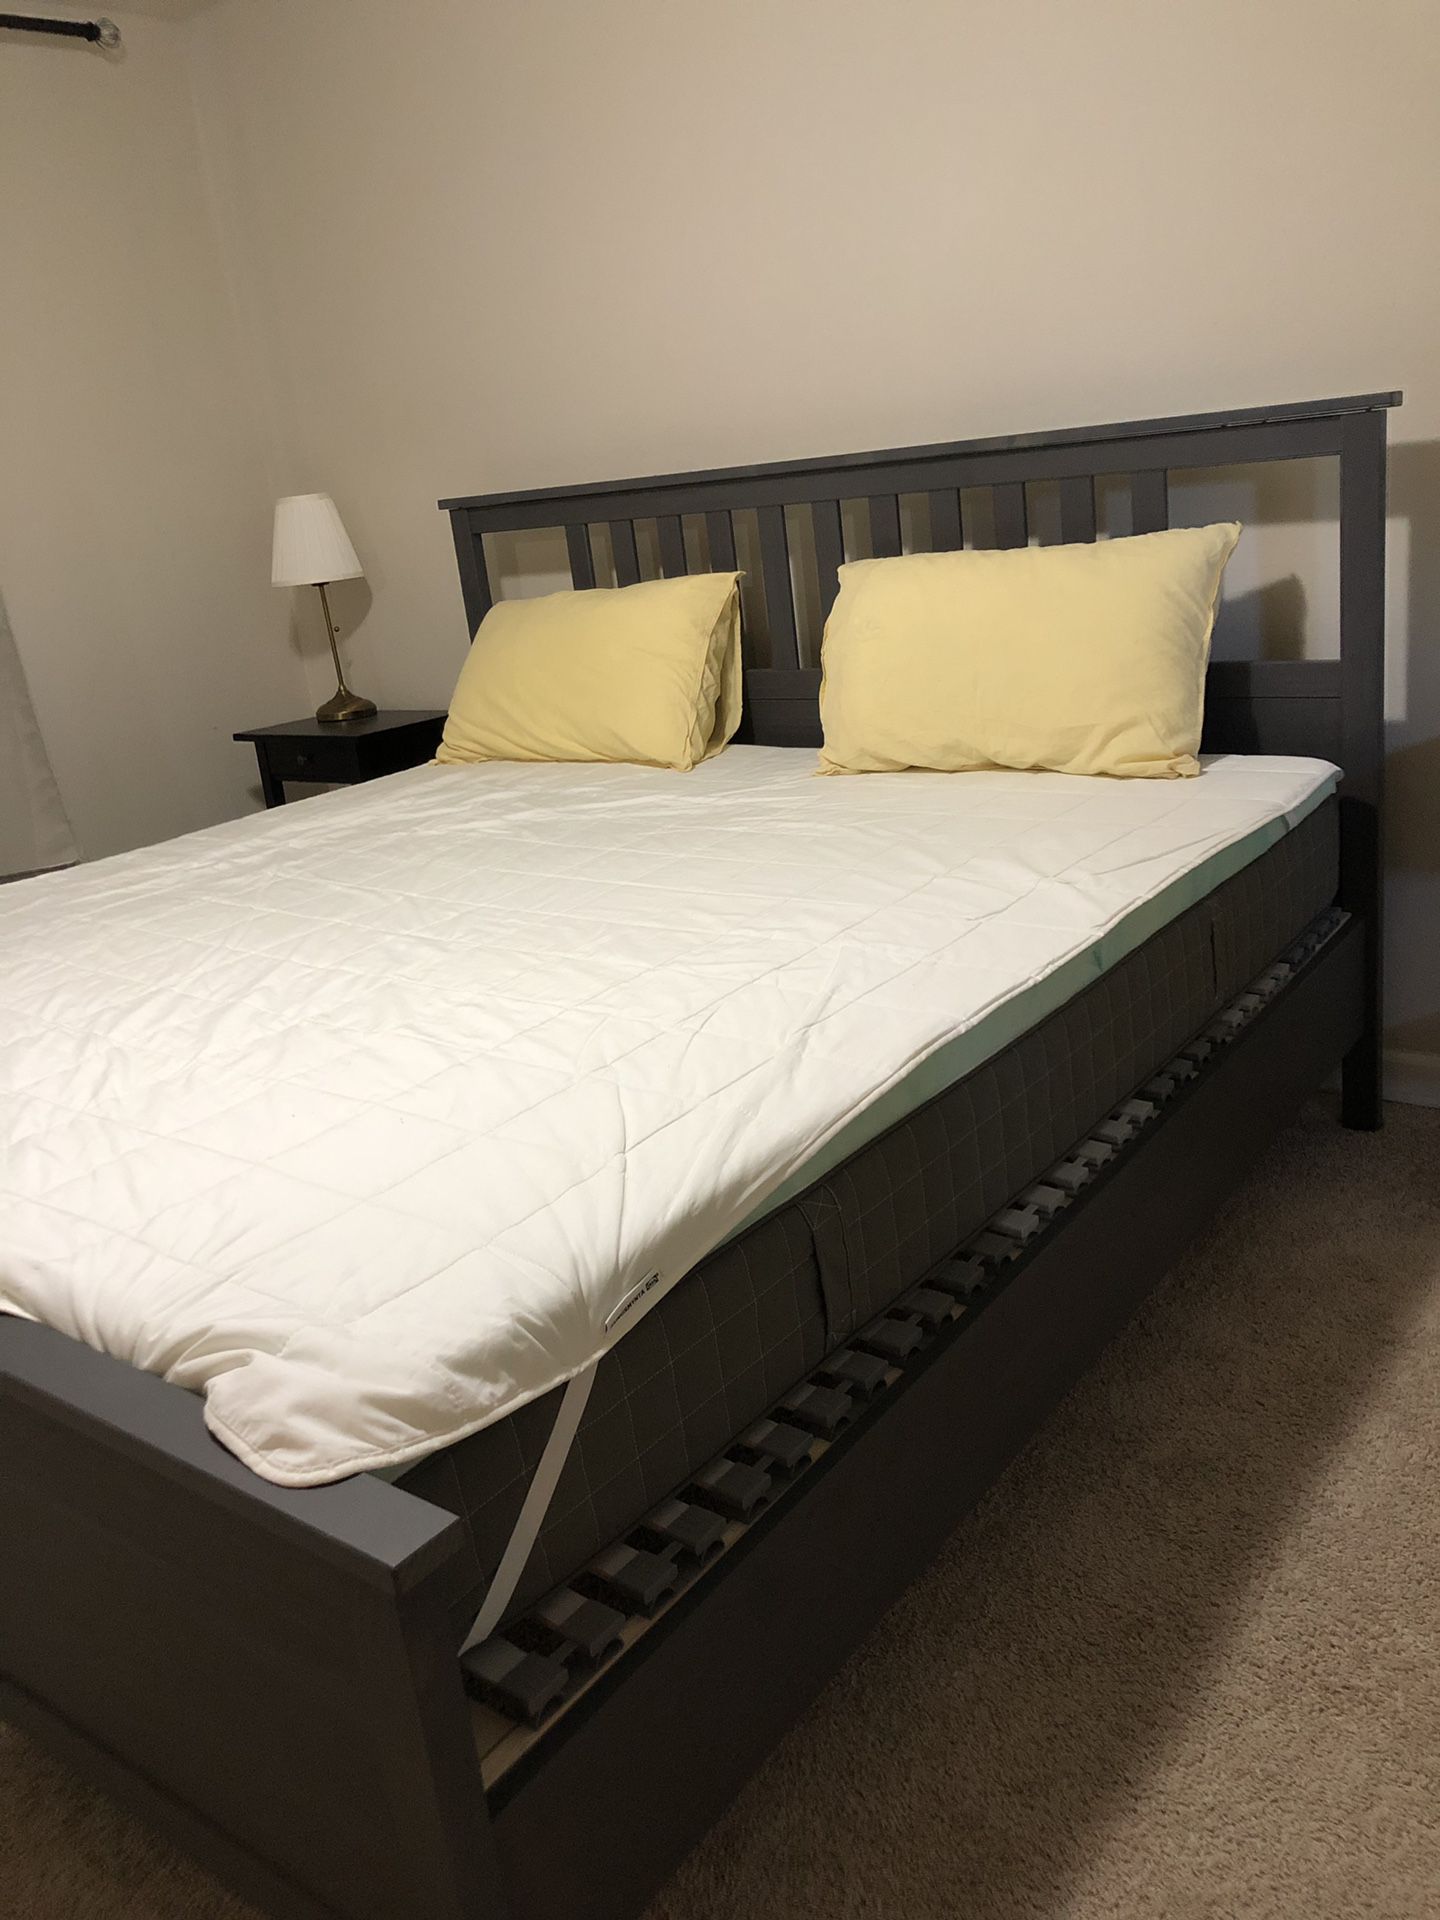 IKEA almost new king size bed set